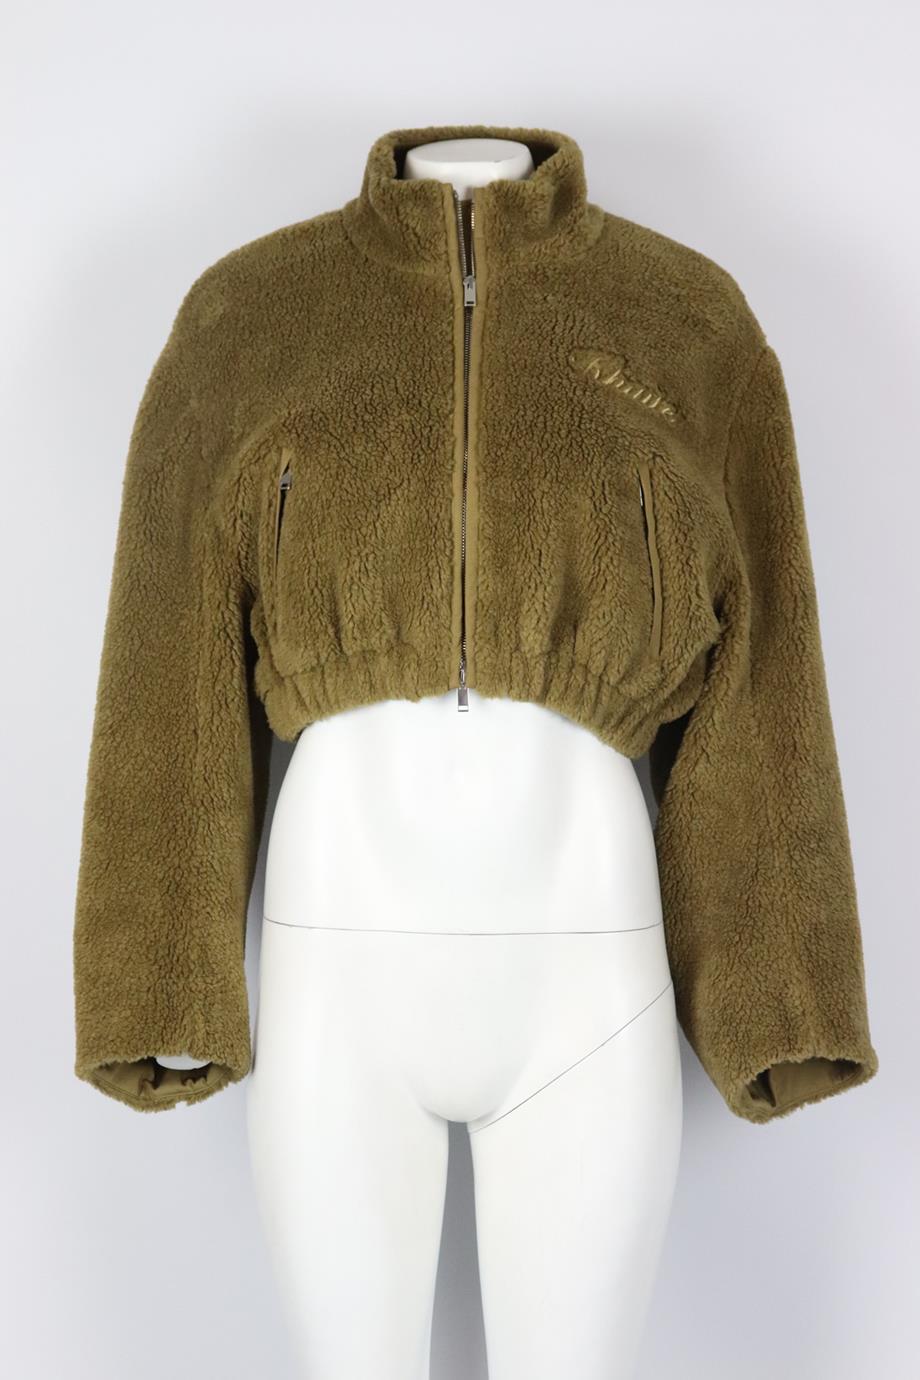 Khaite cropped faux shearling jacket. Light-brown. Long sleeve, mock neck. Zip fastening at front. 54% Acrylic, 46% polyester; combo1: 100% cotton; combo2: 100% cotton; lining: 100% cupro. Size: Small (UK 8, US 4, FR 36, IT 40). Shoulder to